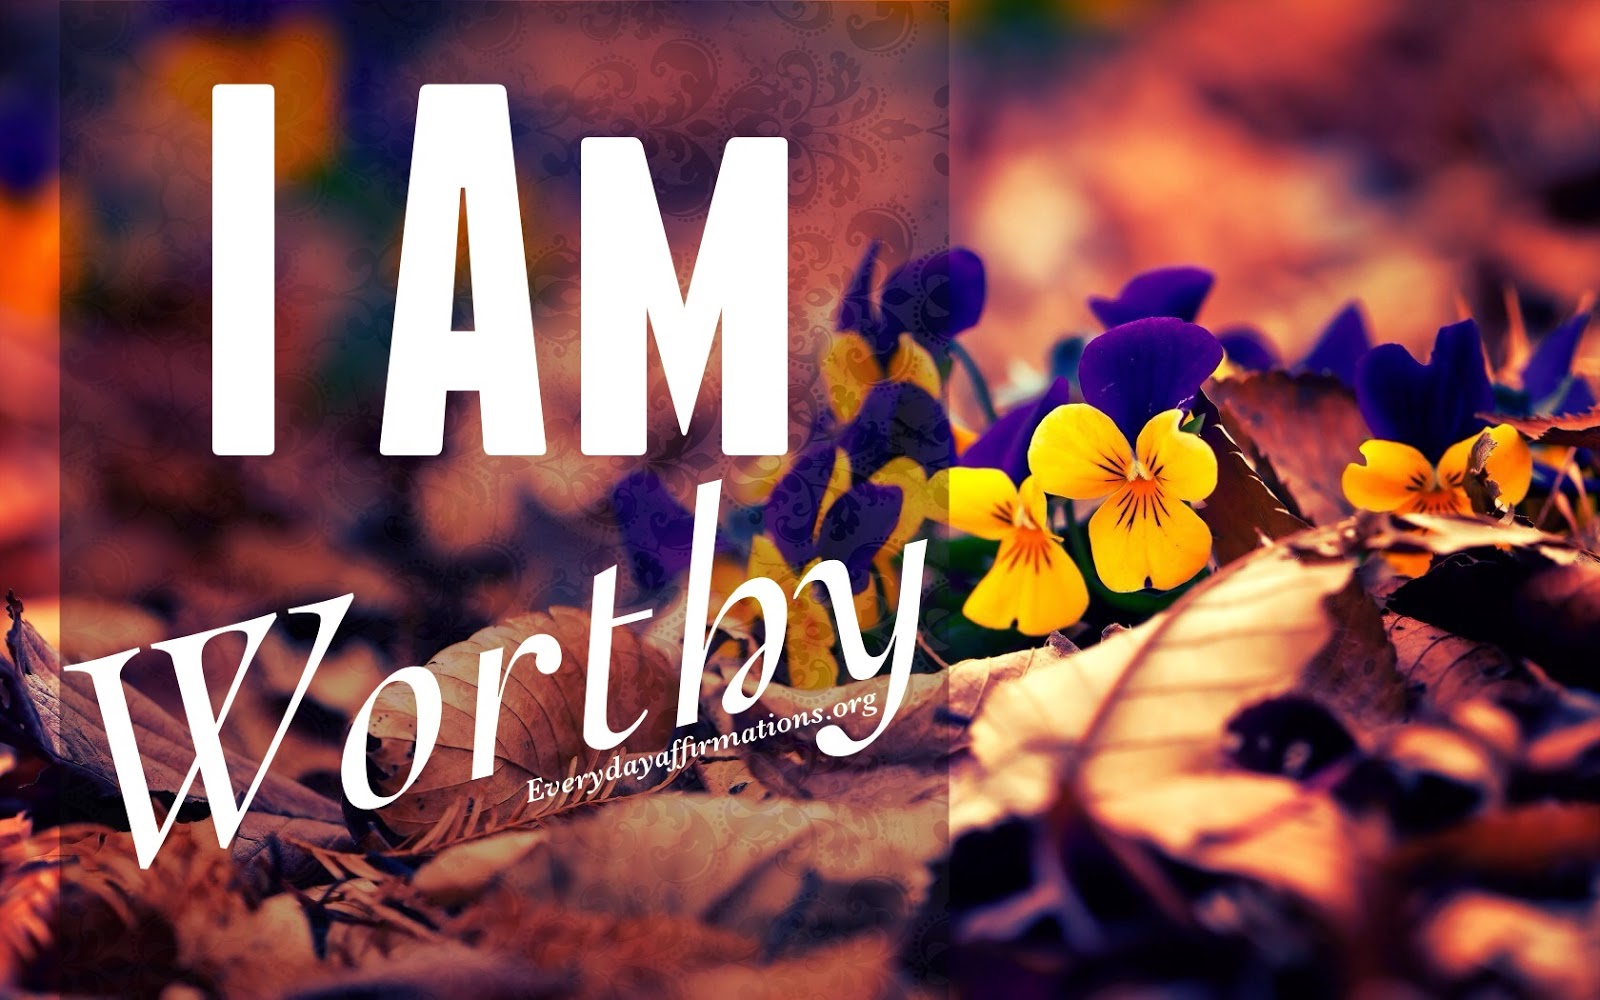 Affirmations for Self Improvement, Daily Affirmations, Daily Affirmations 2014